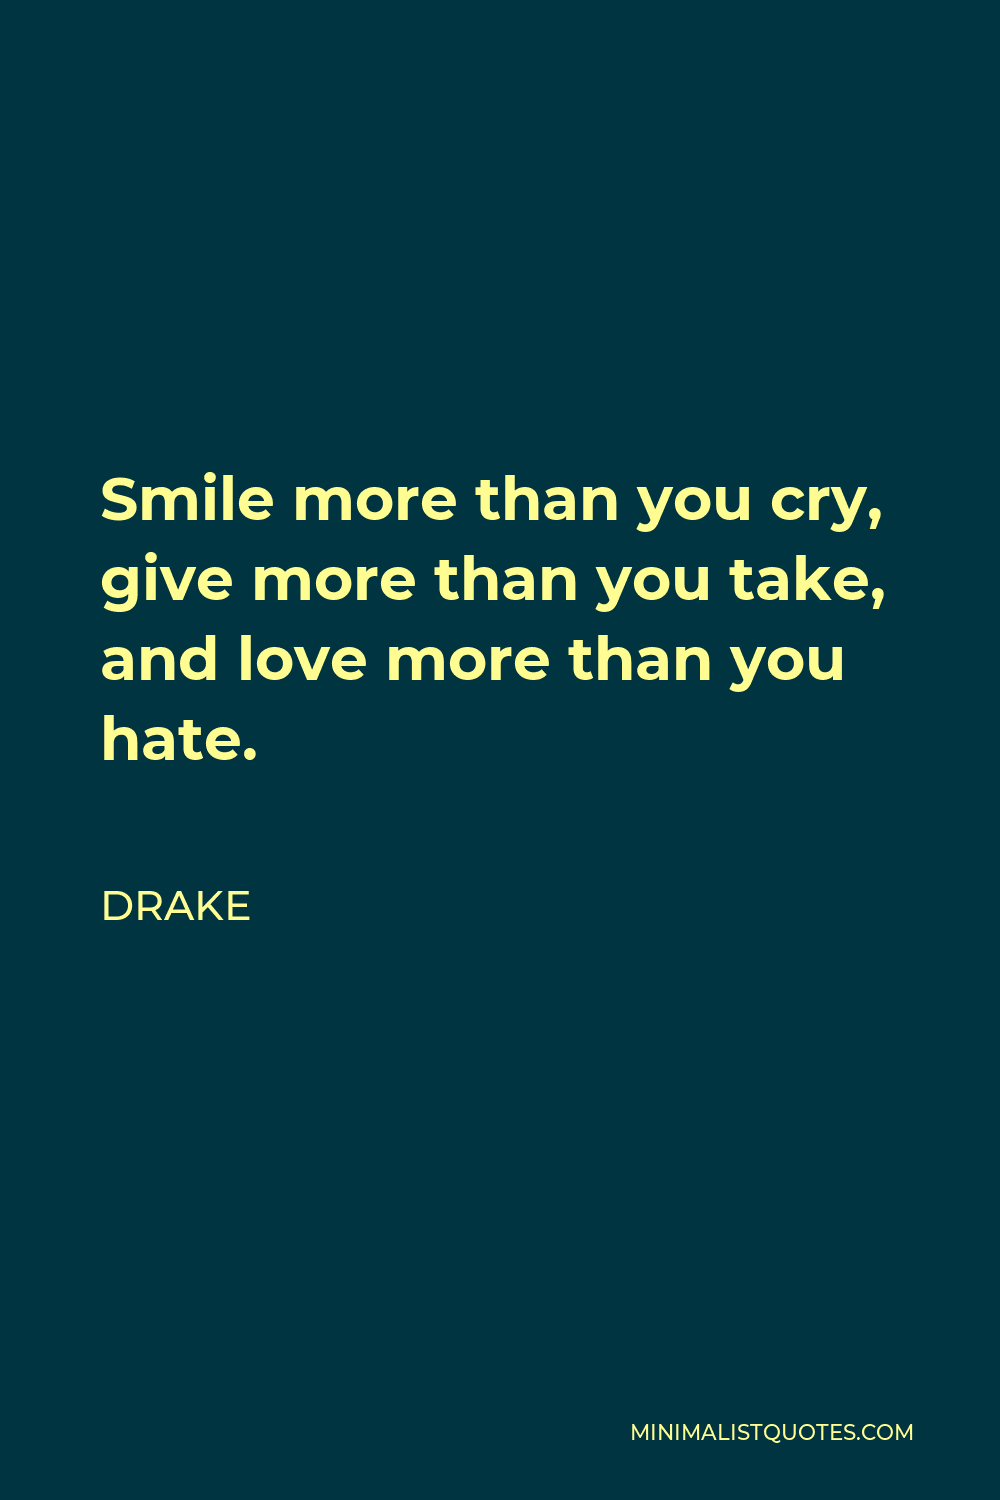 Drake Quote - Smile more than you cry, give more than you take, and love more than you hate.